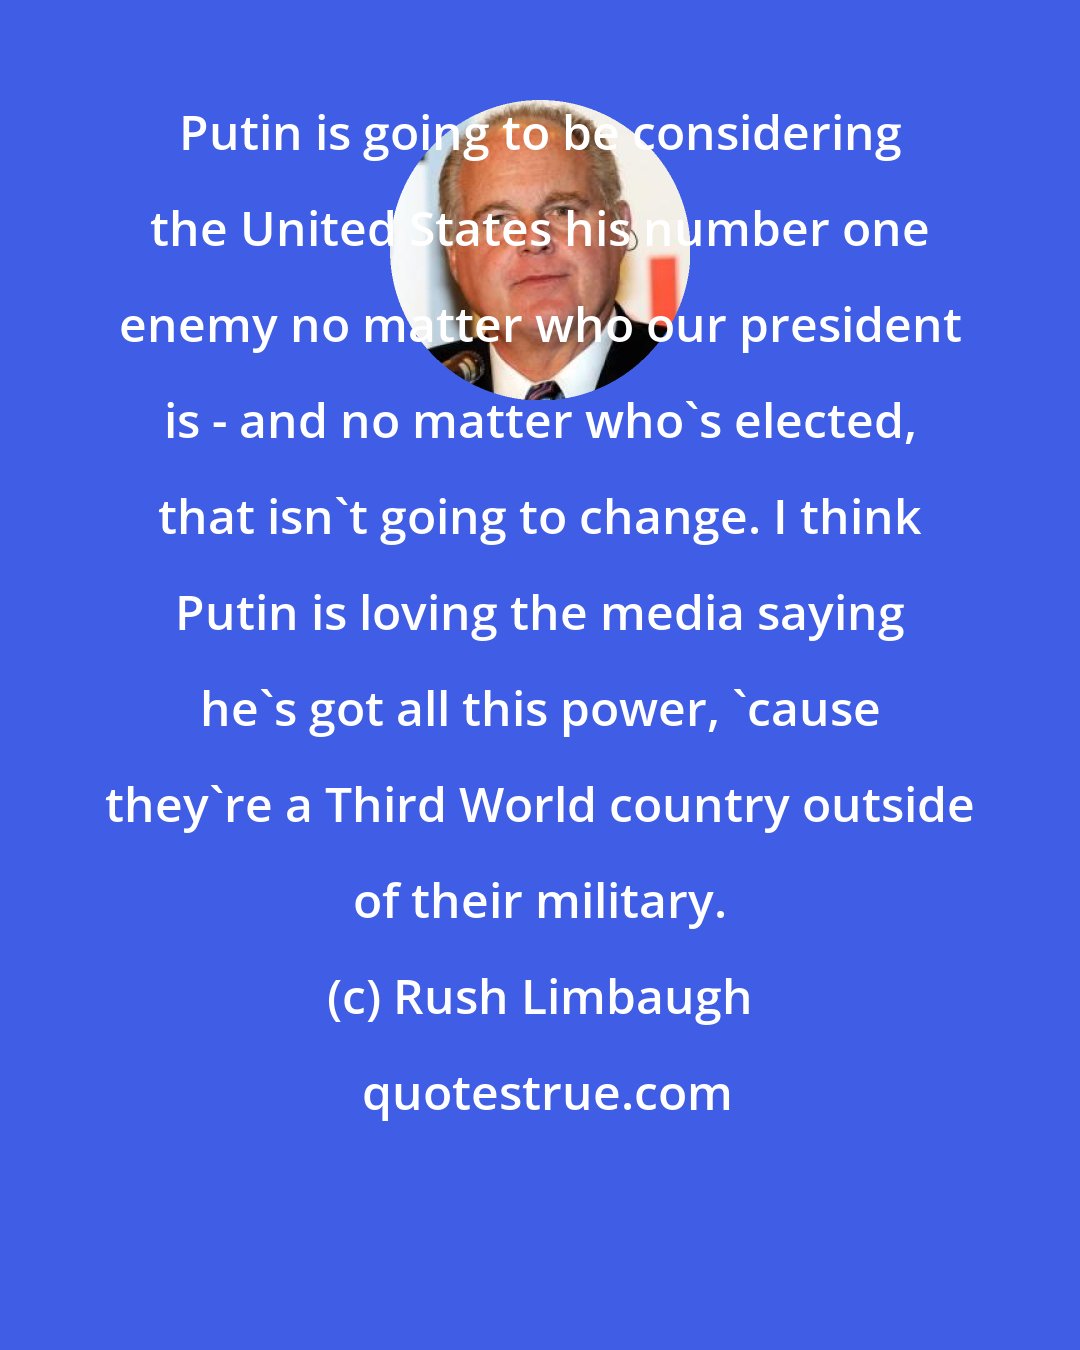 Rush Limbaugh: Putin is going to be considering the United States his number one enemy no matter who our president is - and no matter who's elected, that isn't going to change. I think Putin is loving the media saying he's got all this power, 'cause they're a Third World country outside of their military.